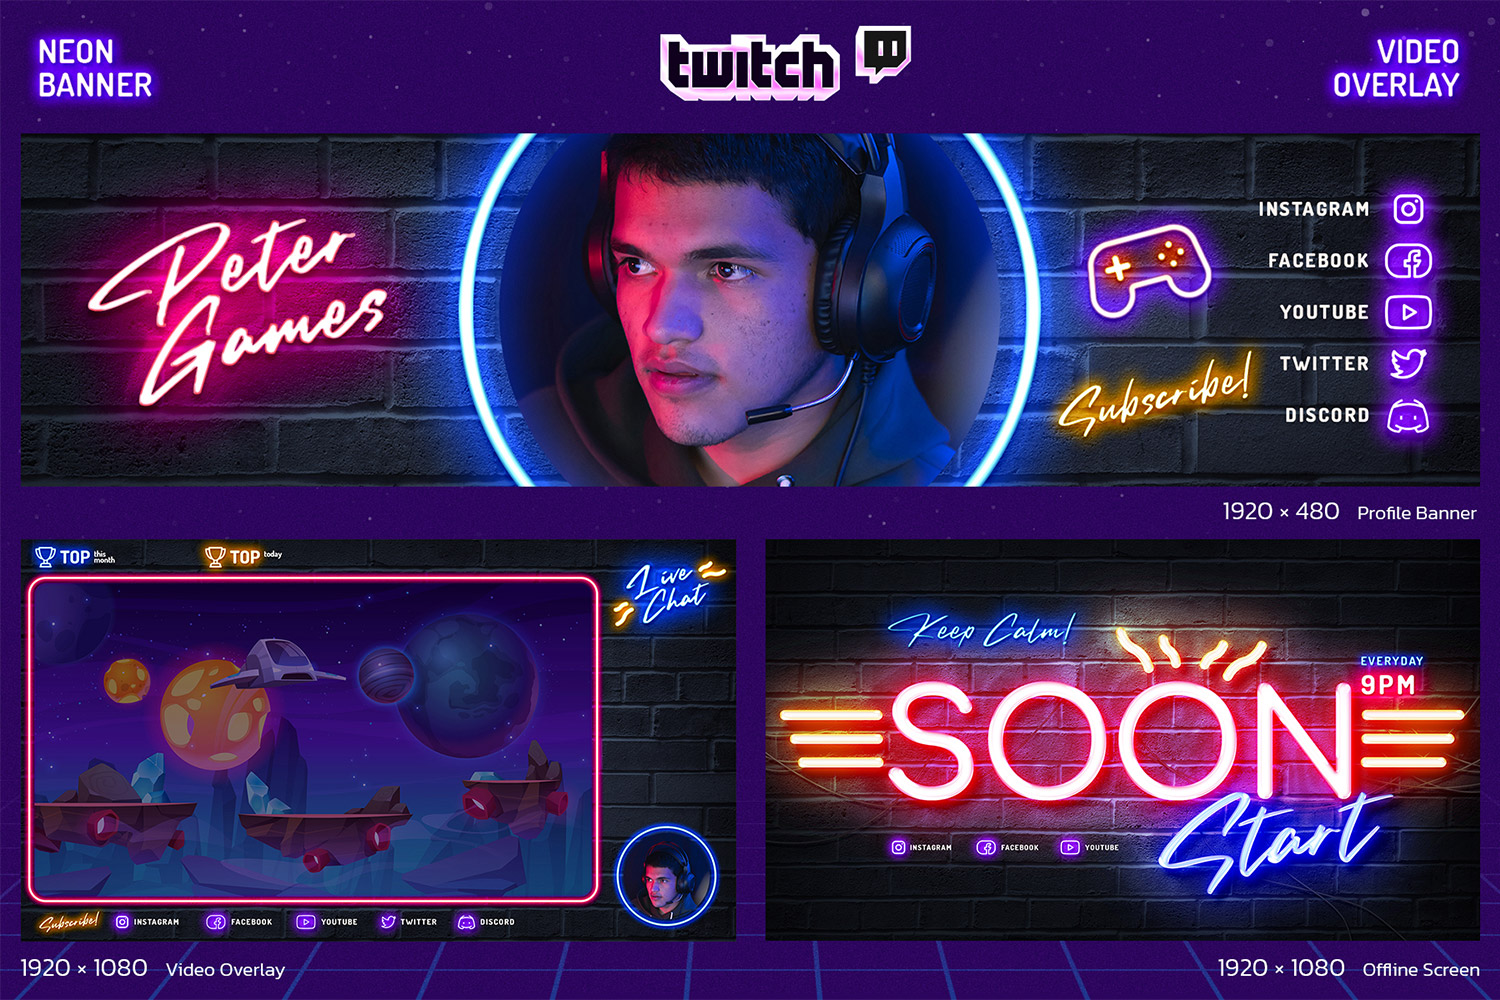 Neon Gaming Twitch Profile Templates